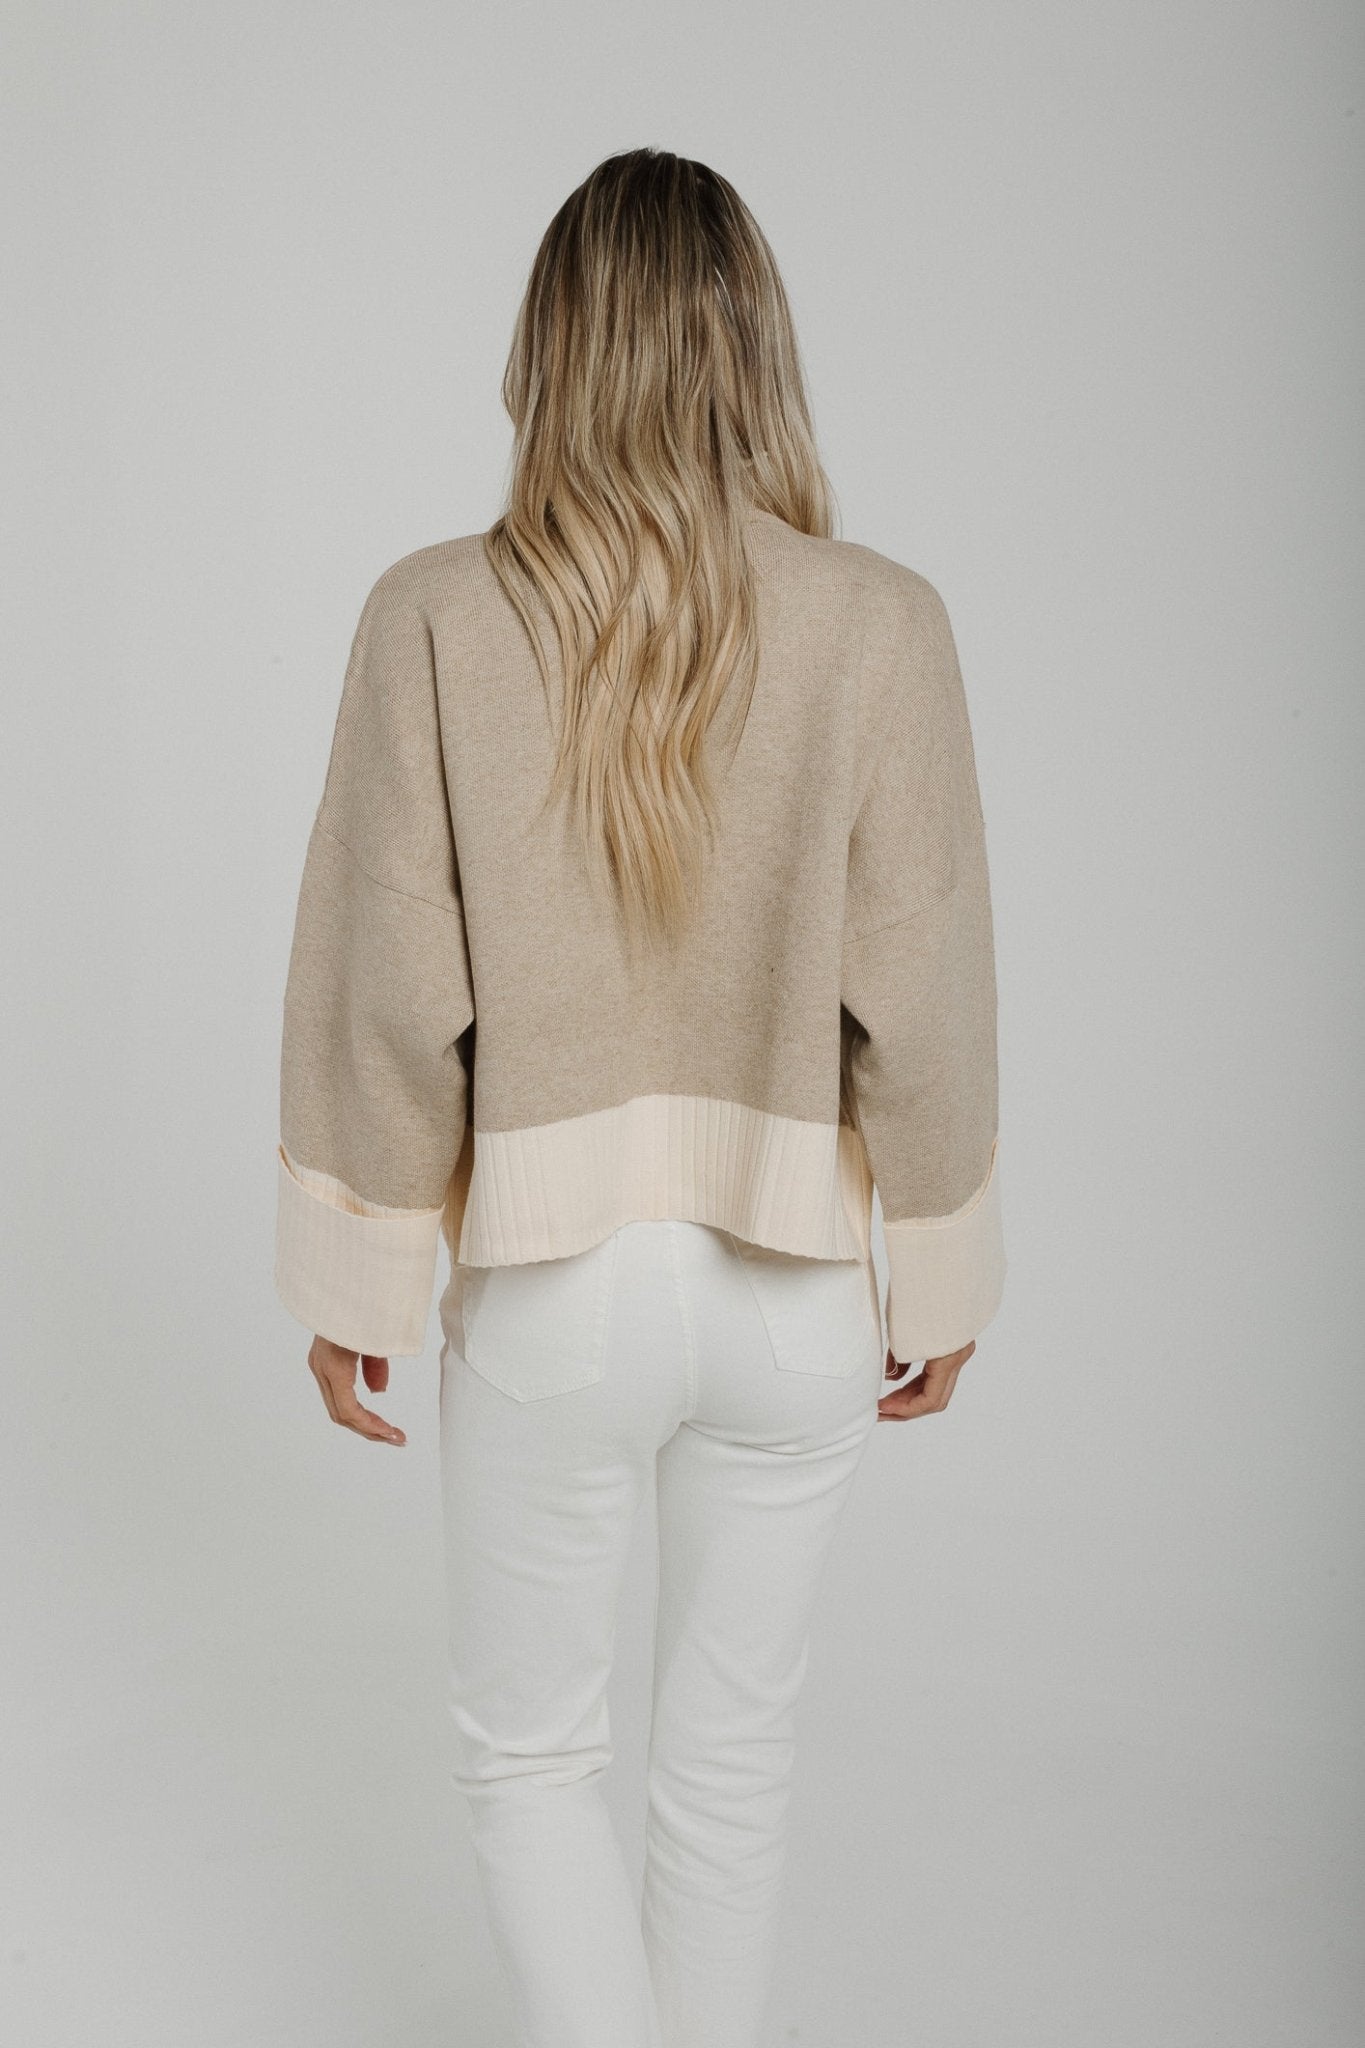 Polly Contrast High Neck Sweater In Neutral - The Walk in Wardrobe